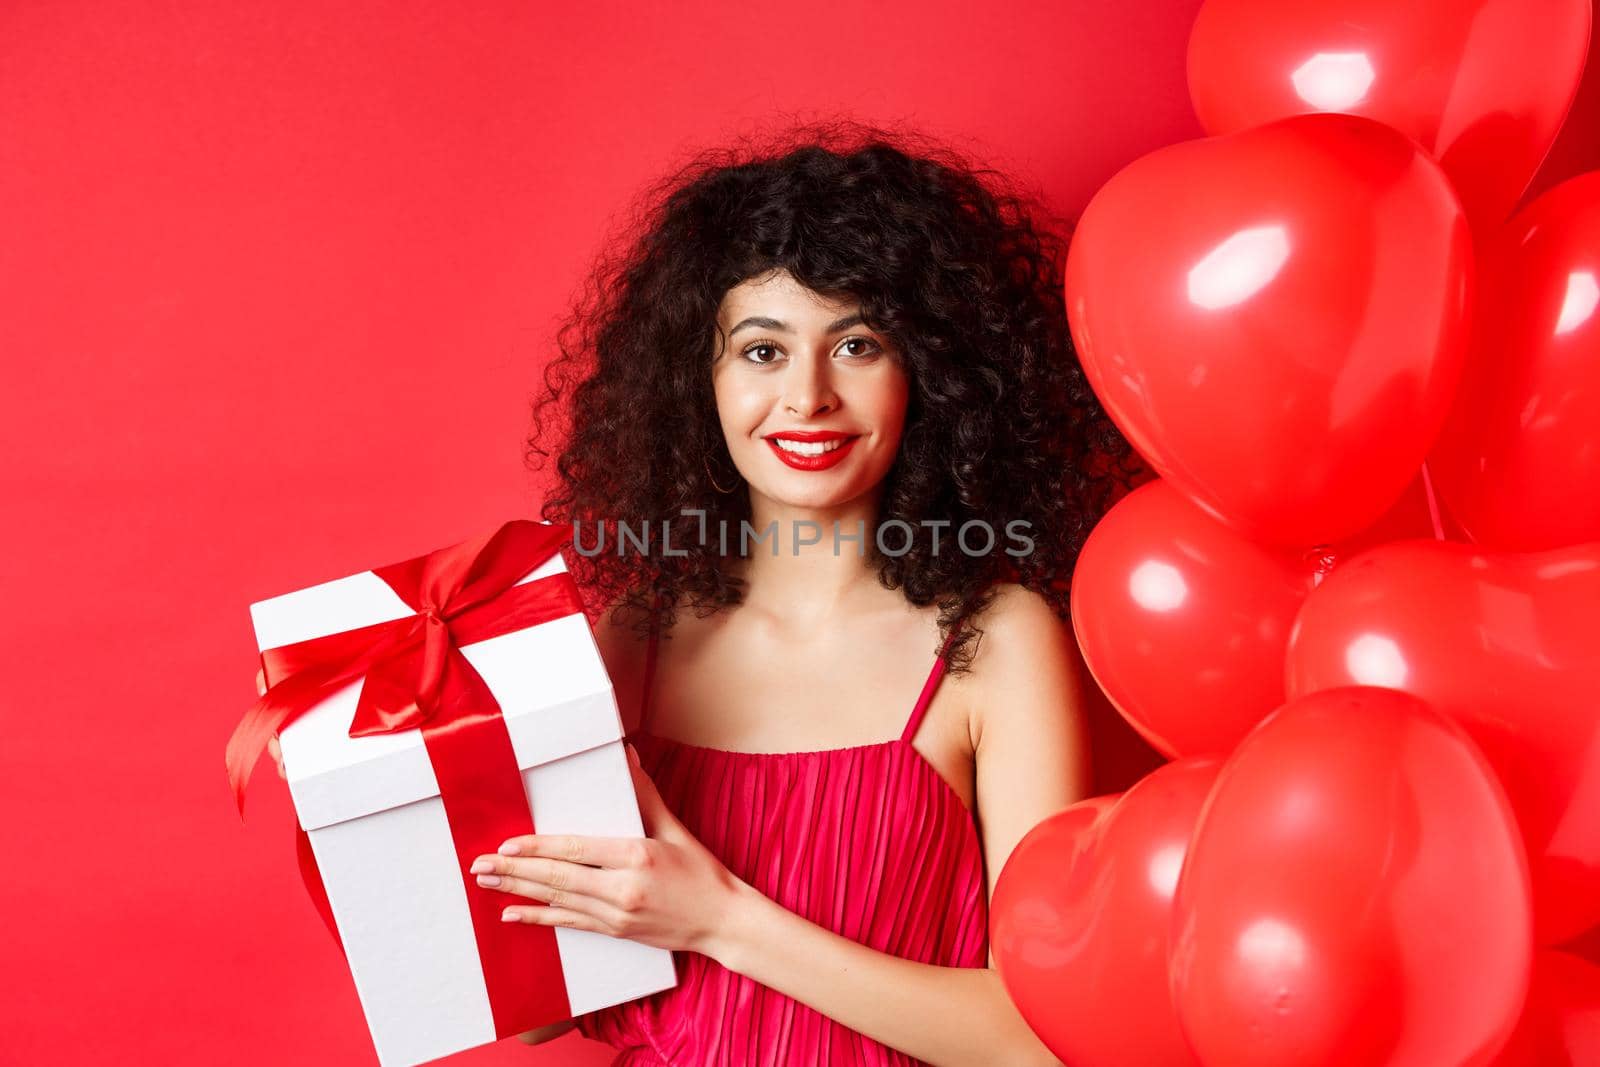 Holidays and celebration. Beautiful woman with curly hair, standing near heart balloons, holding gift box and smiling happy, white background.